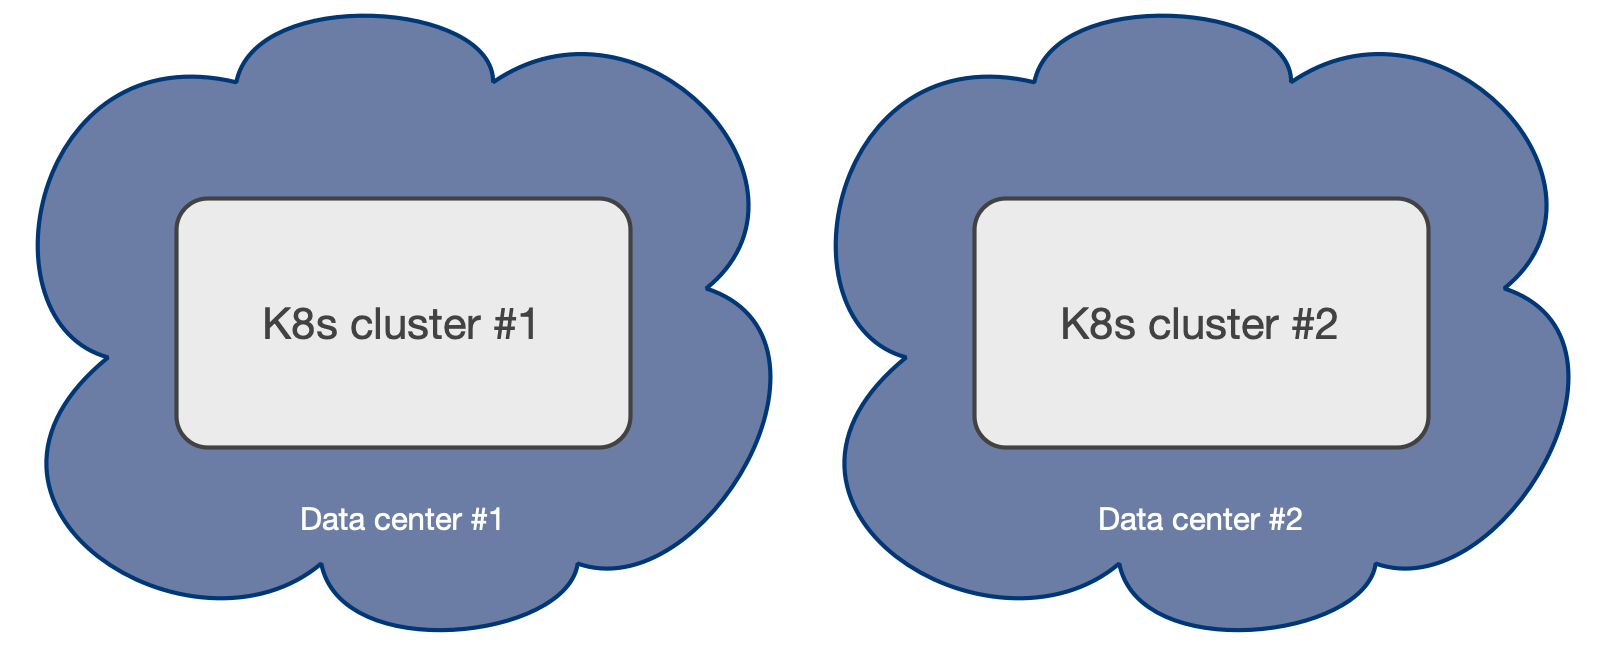 Example of a Kubernetes architecture with only 2 data centers